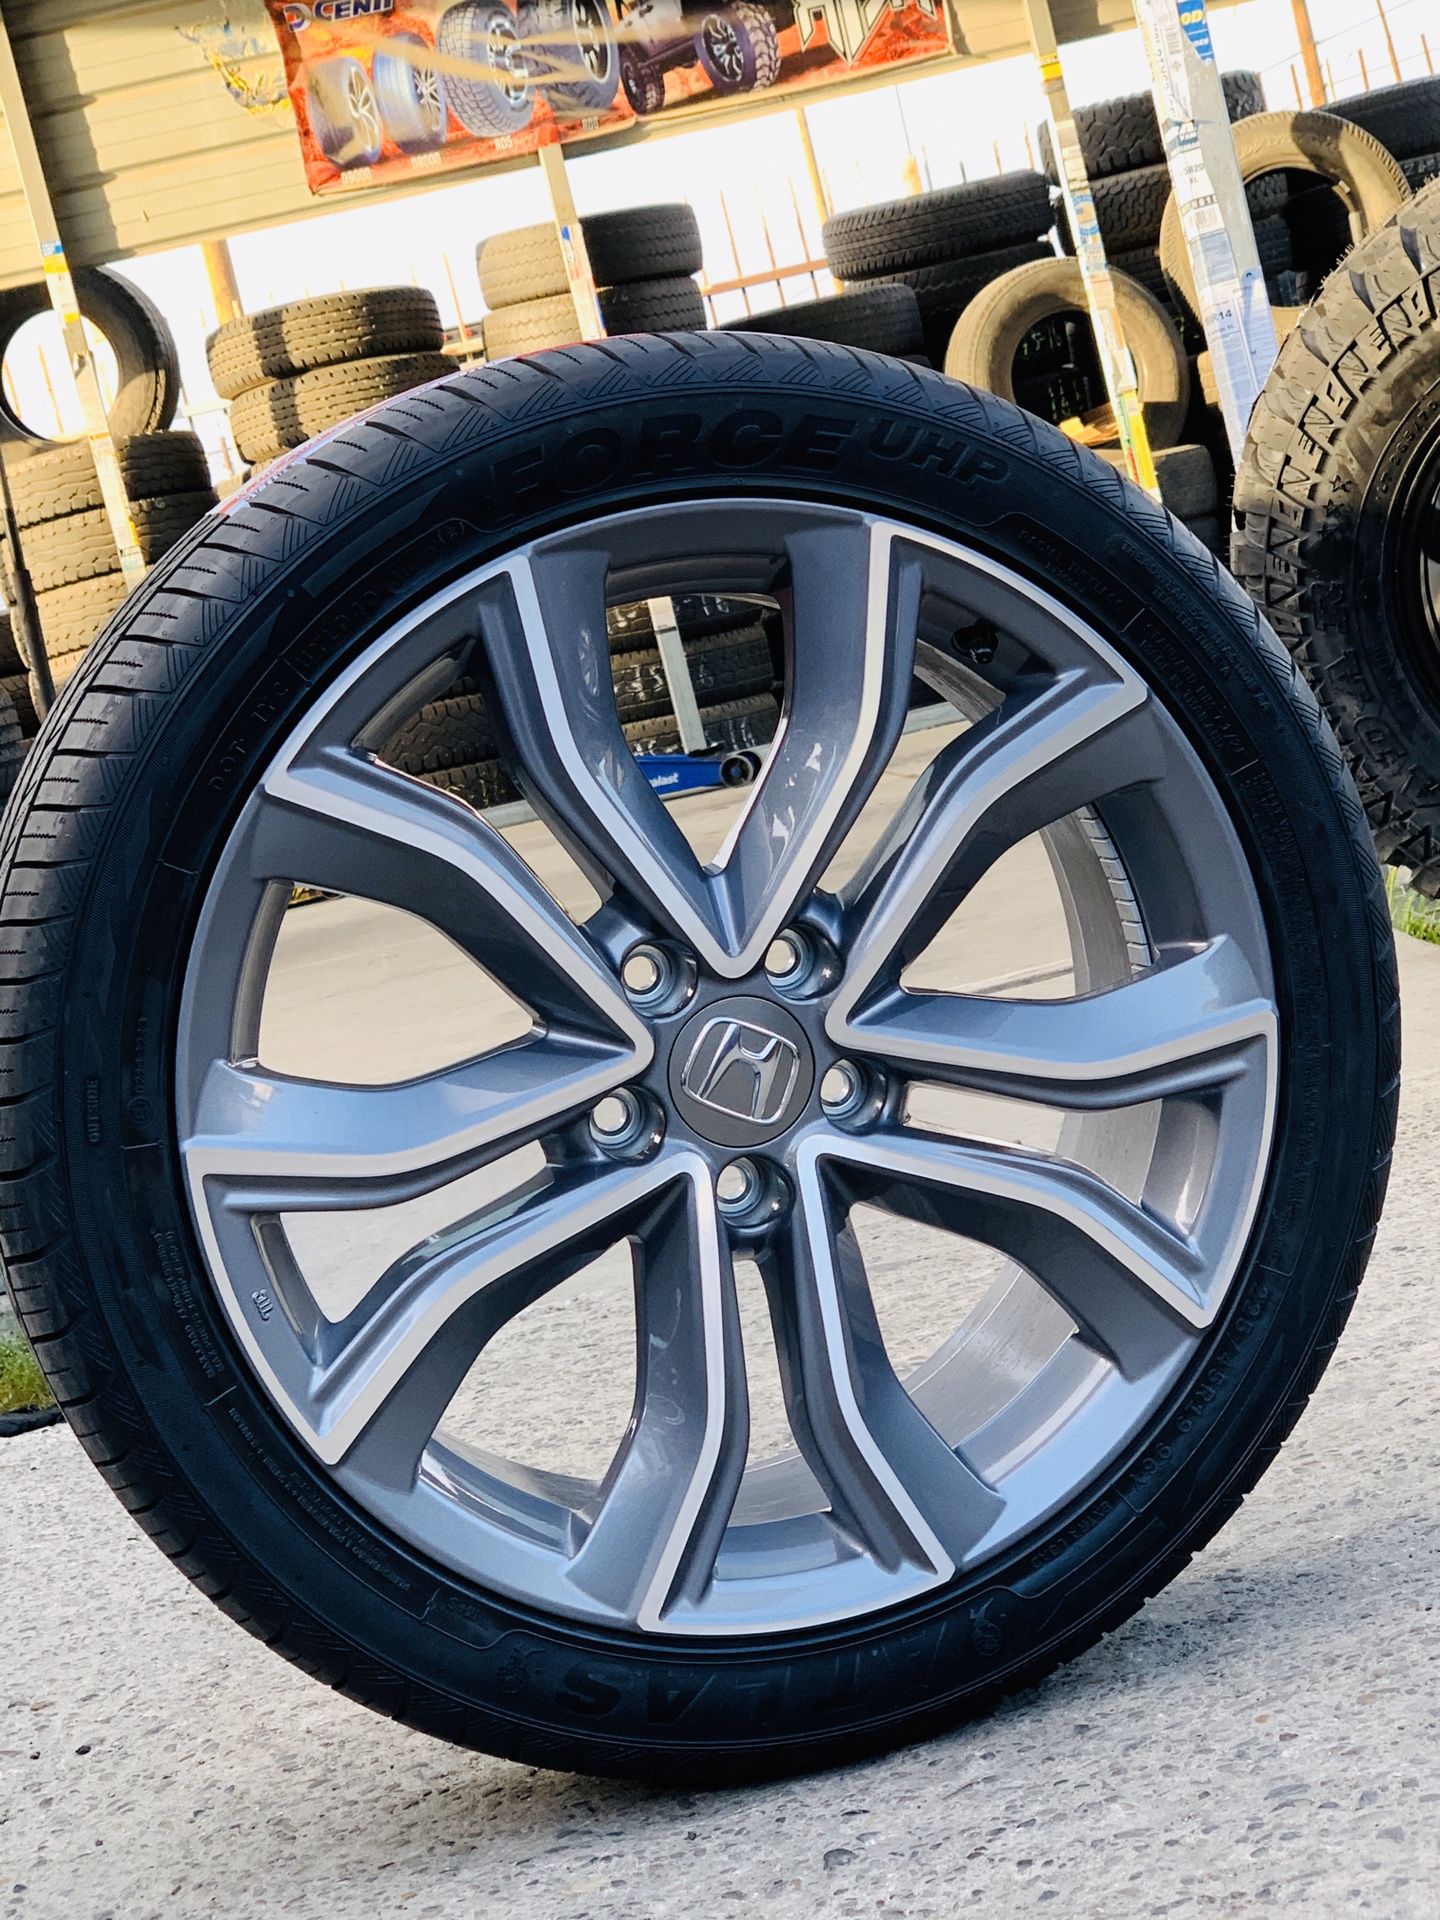 19” new Honda rims and tires for sale civic accord crv